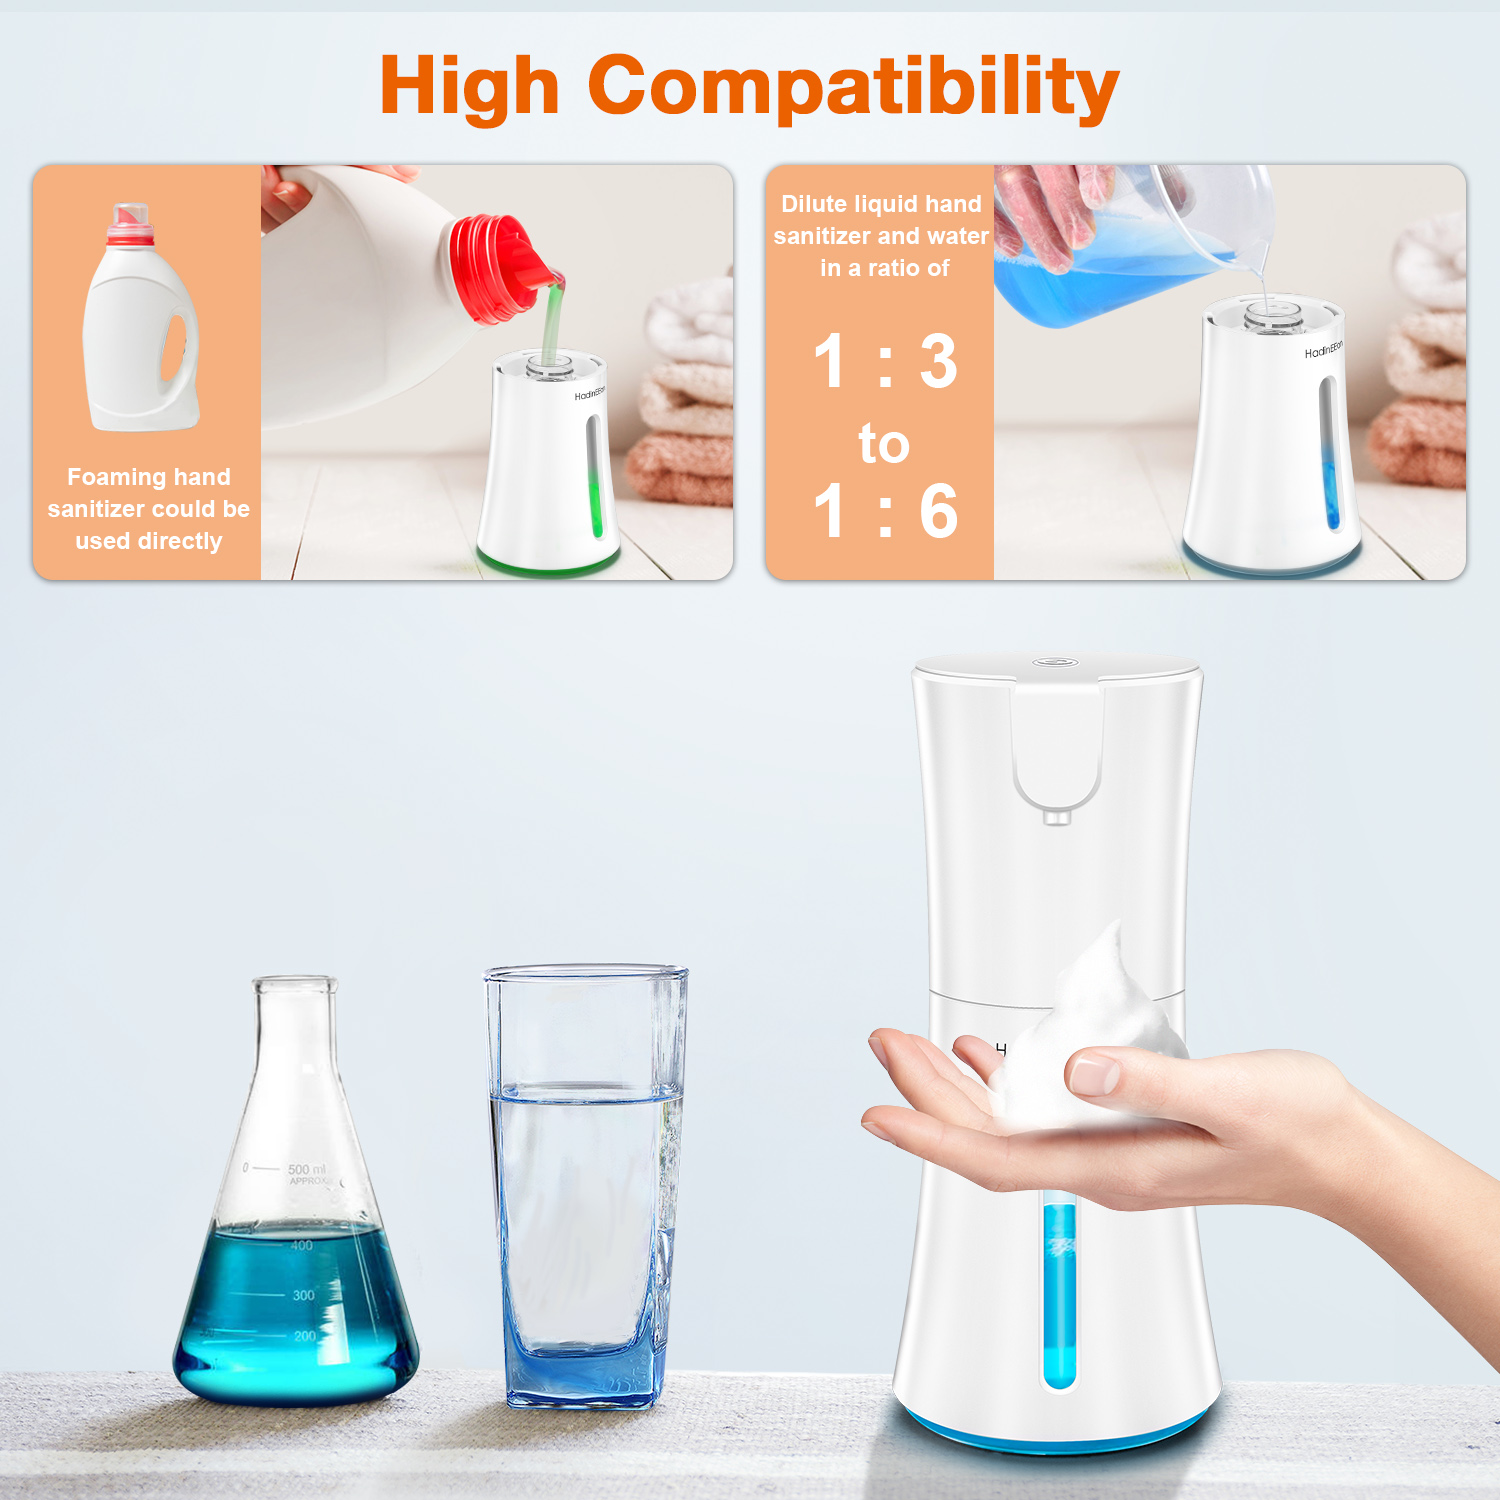 Automatic Foaming Soap Dispenser with Sensor for Kitchen, Bathroom (350ml for 600 hand washes) - image 4 of 8